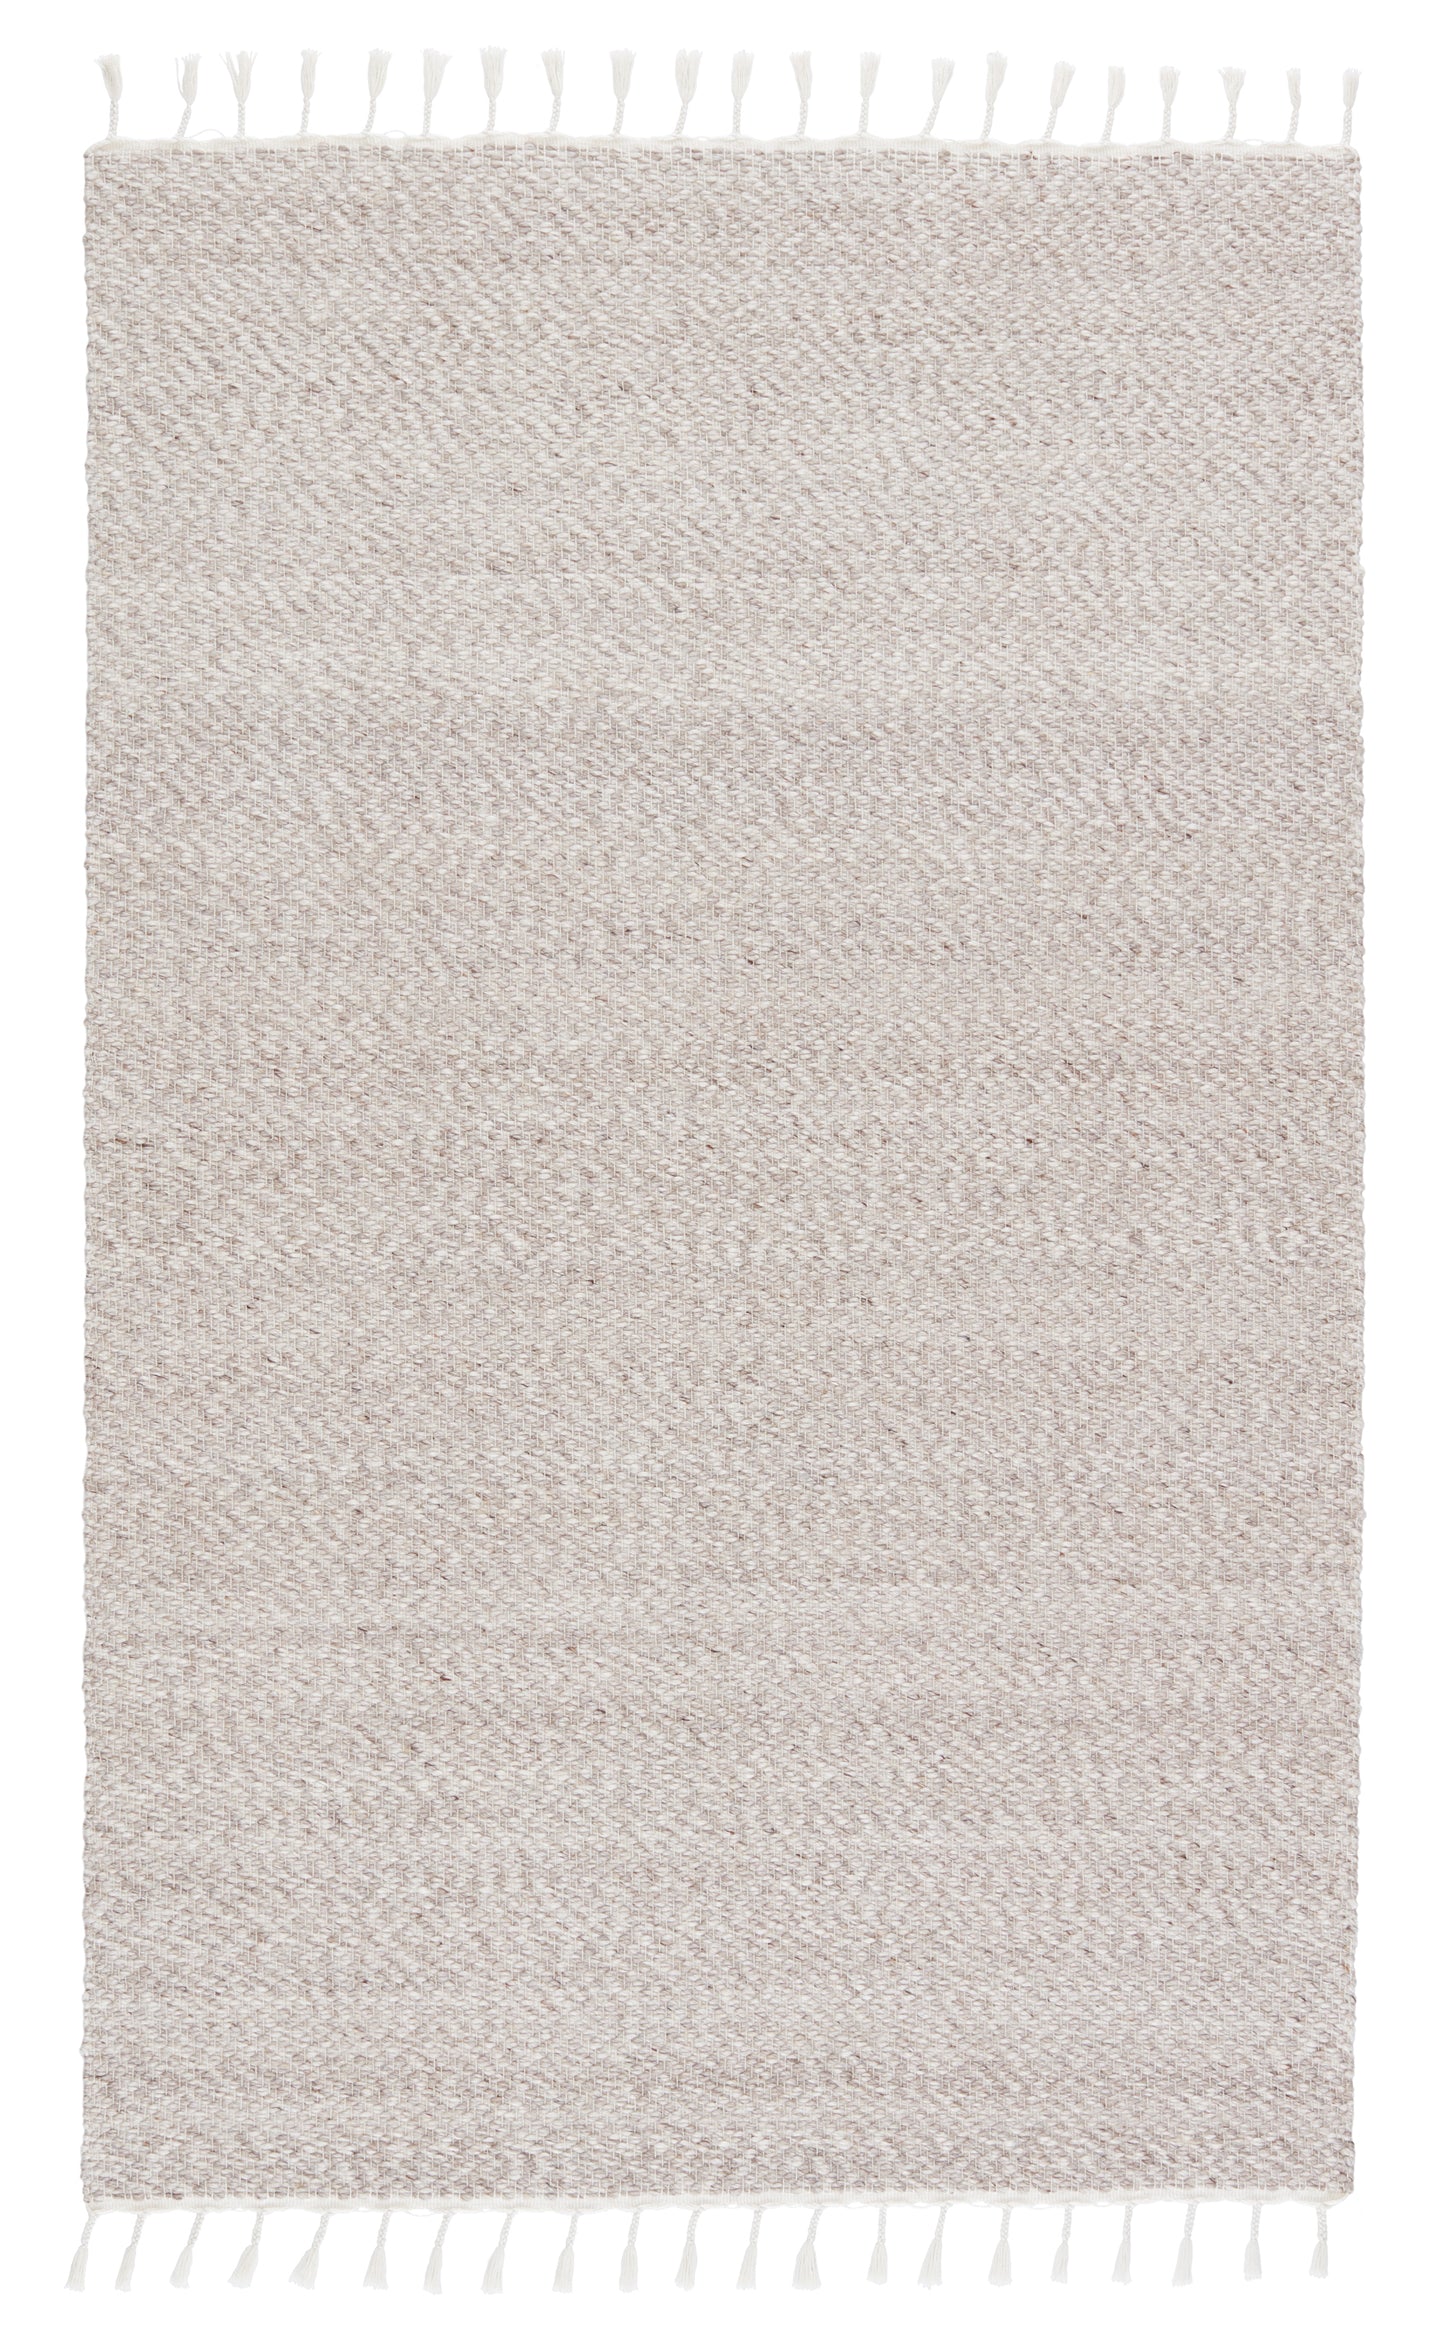 Majorca Adria Handmade Synthetic Blend Outdoor Area Rug From Jaipur Living